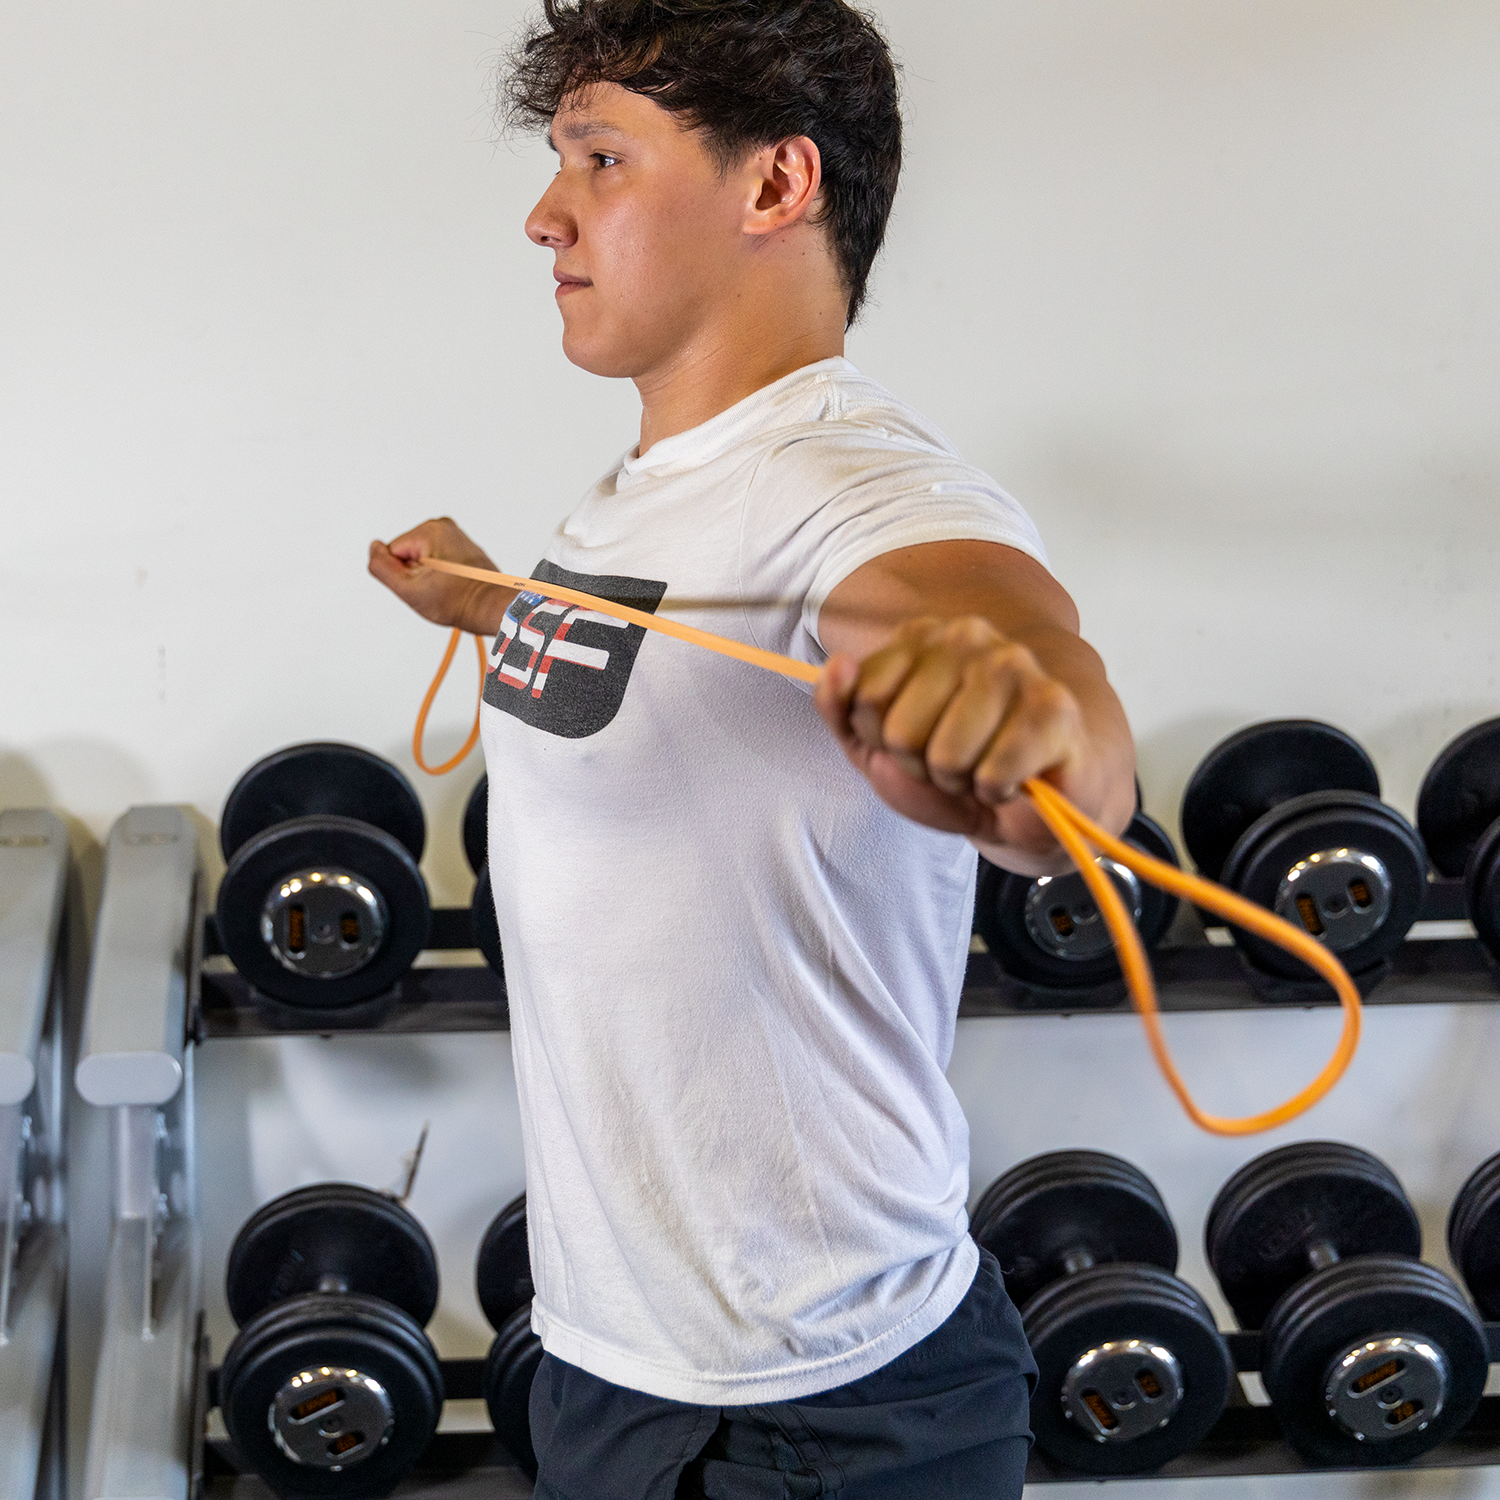 The Most Dangerous Resistance Band Exercises - Strength Zone Training